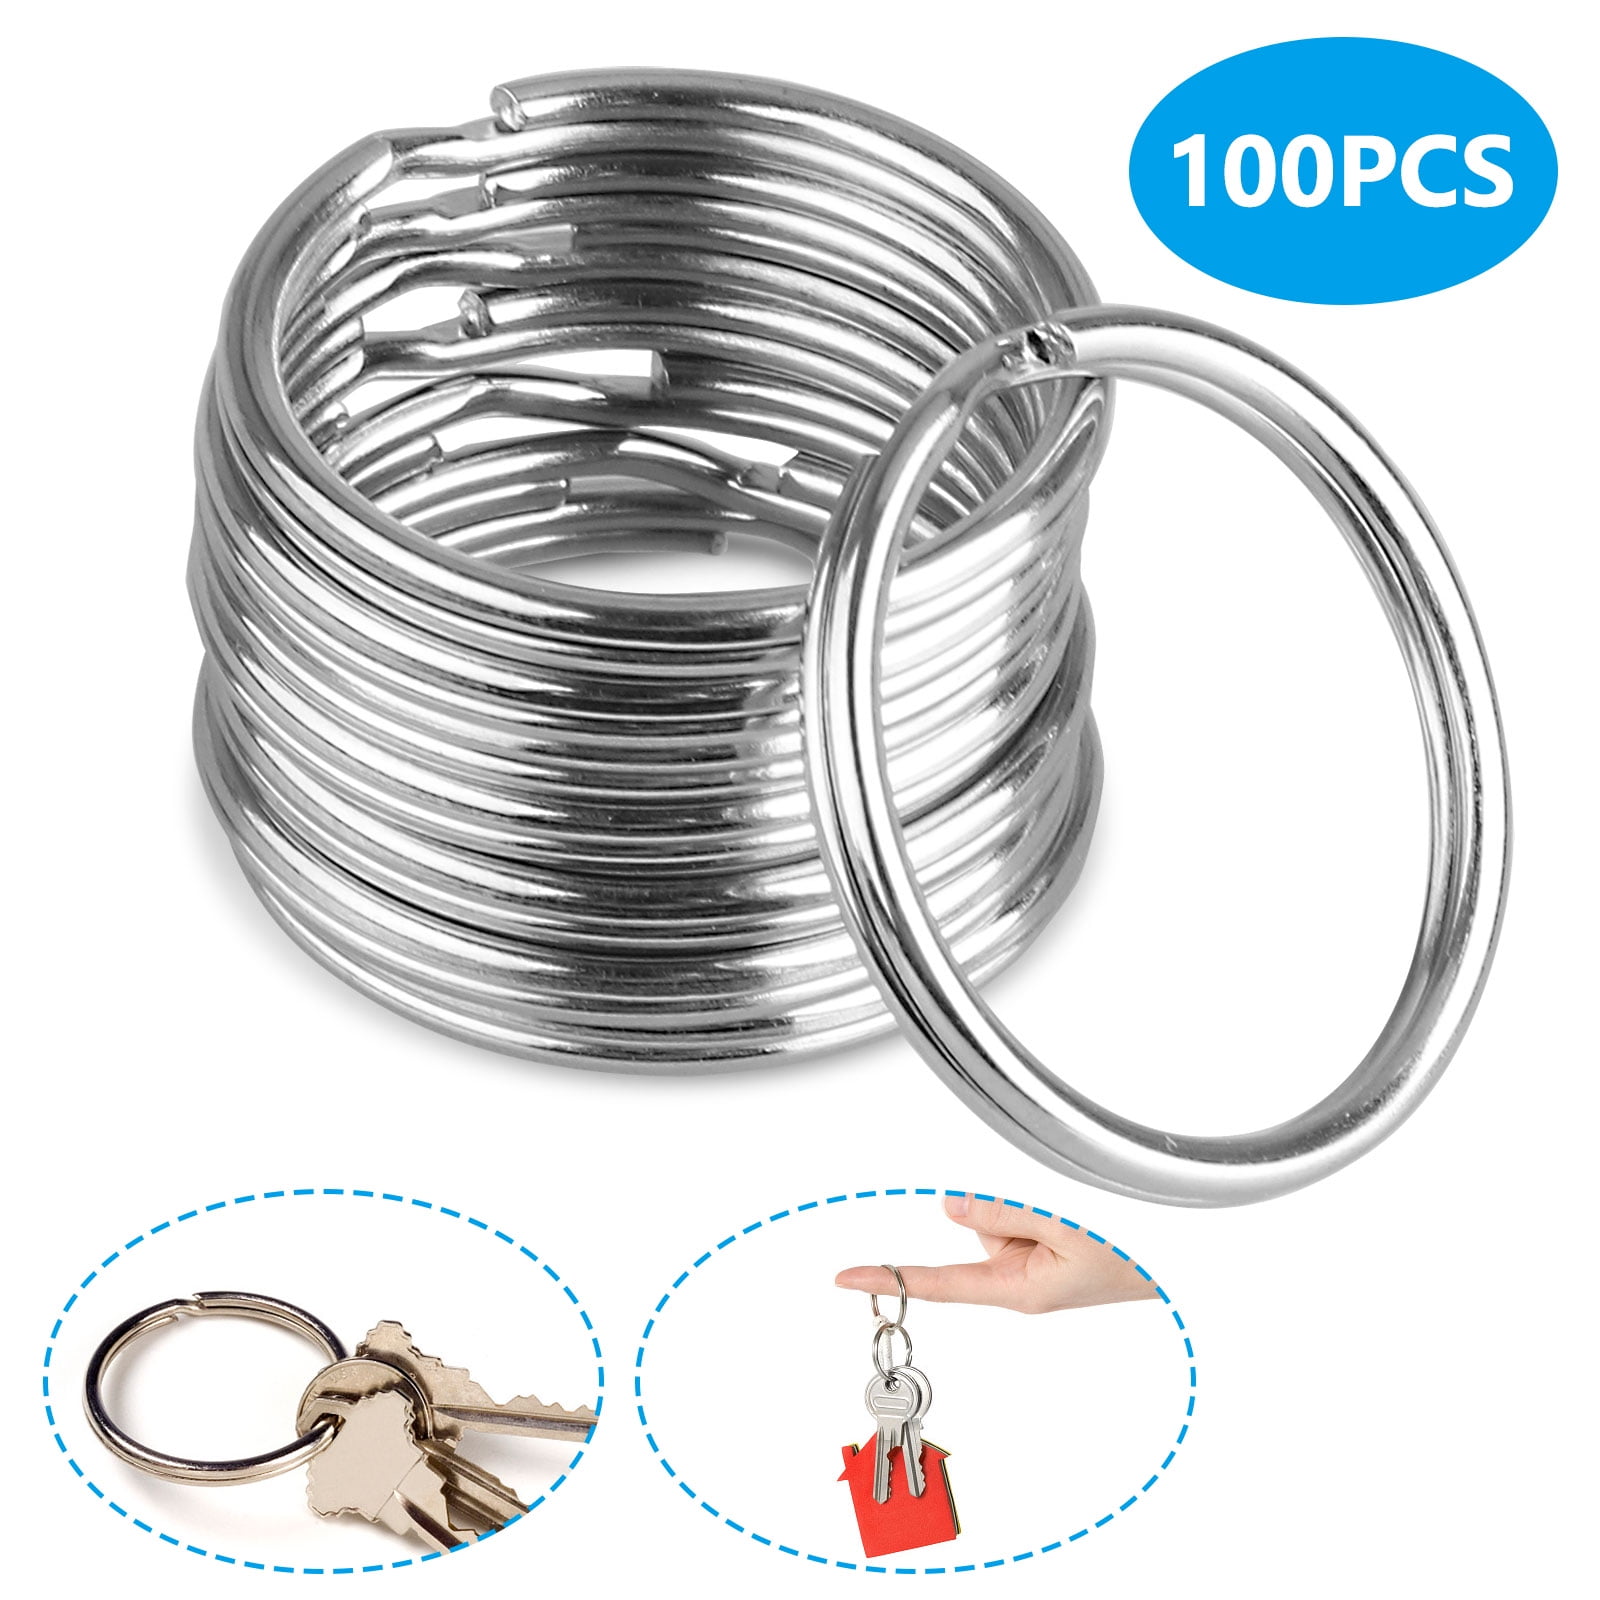 Silver Steel Round Edged Circular Keychain Ring Clips for Car Home Keys Organization C-YSK2 25 mm Nickel Plated Split Key Chain Ring Connector Keychain Arts & Crafts -- Pack 130 0.98 